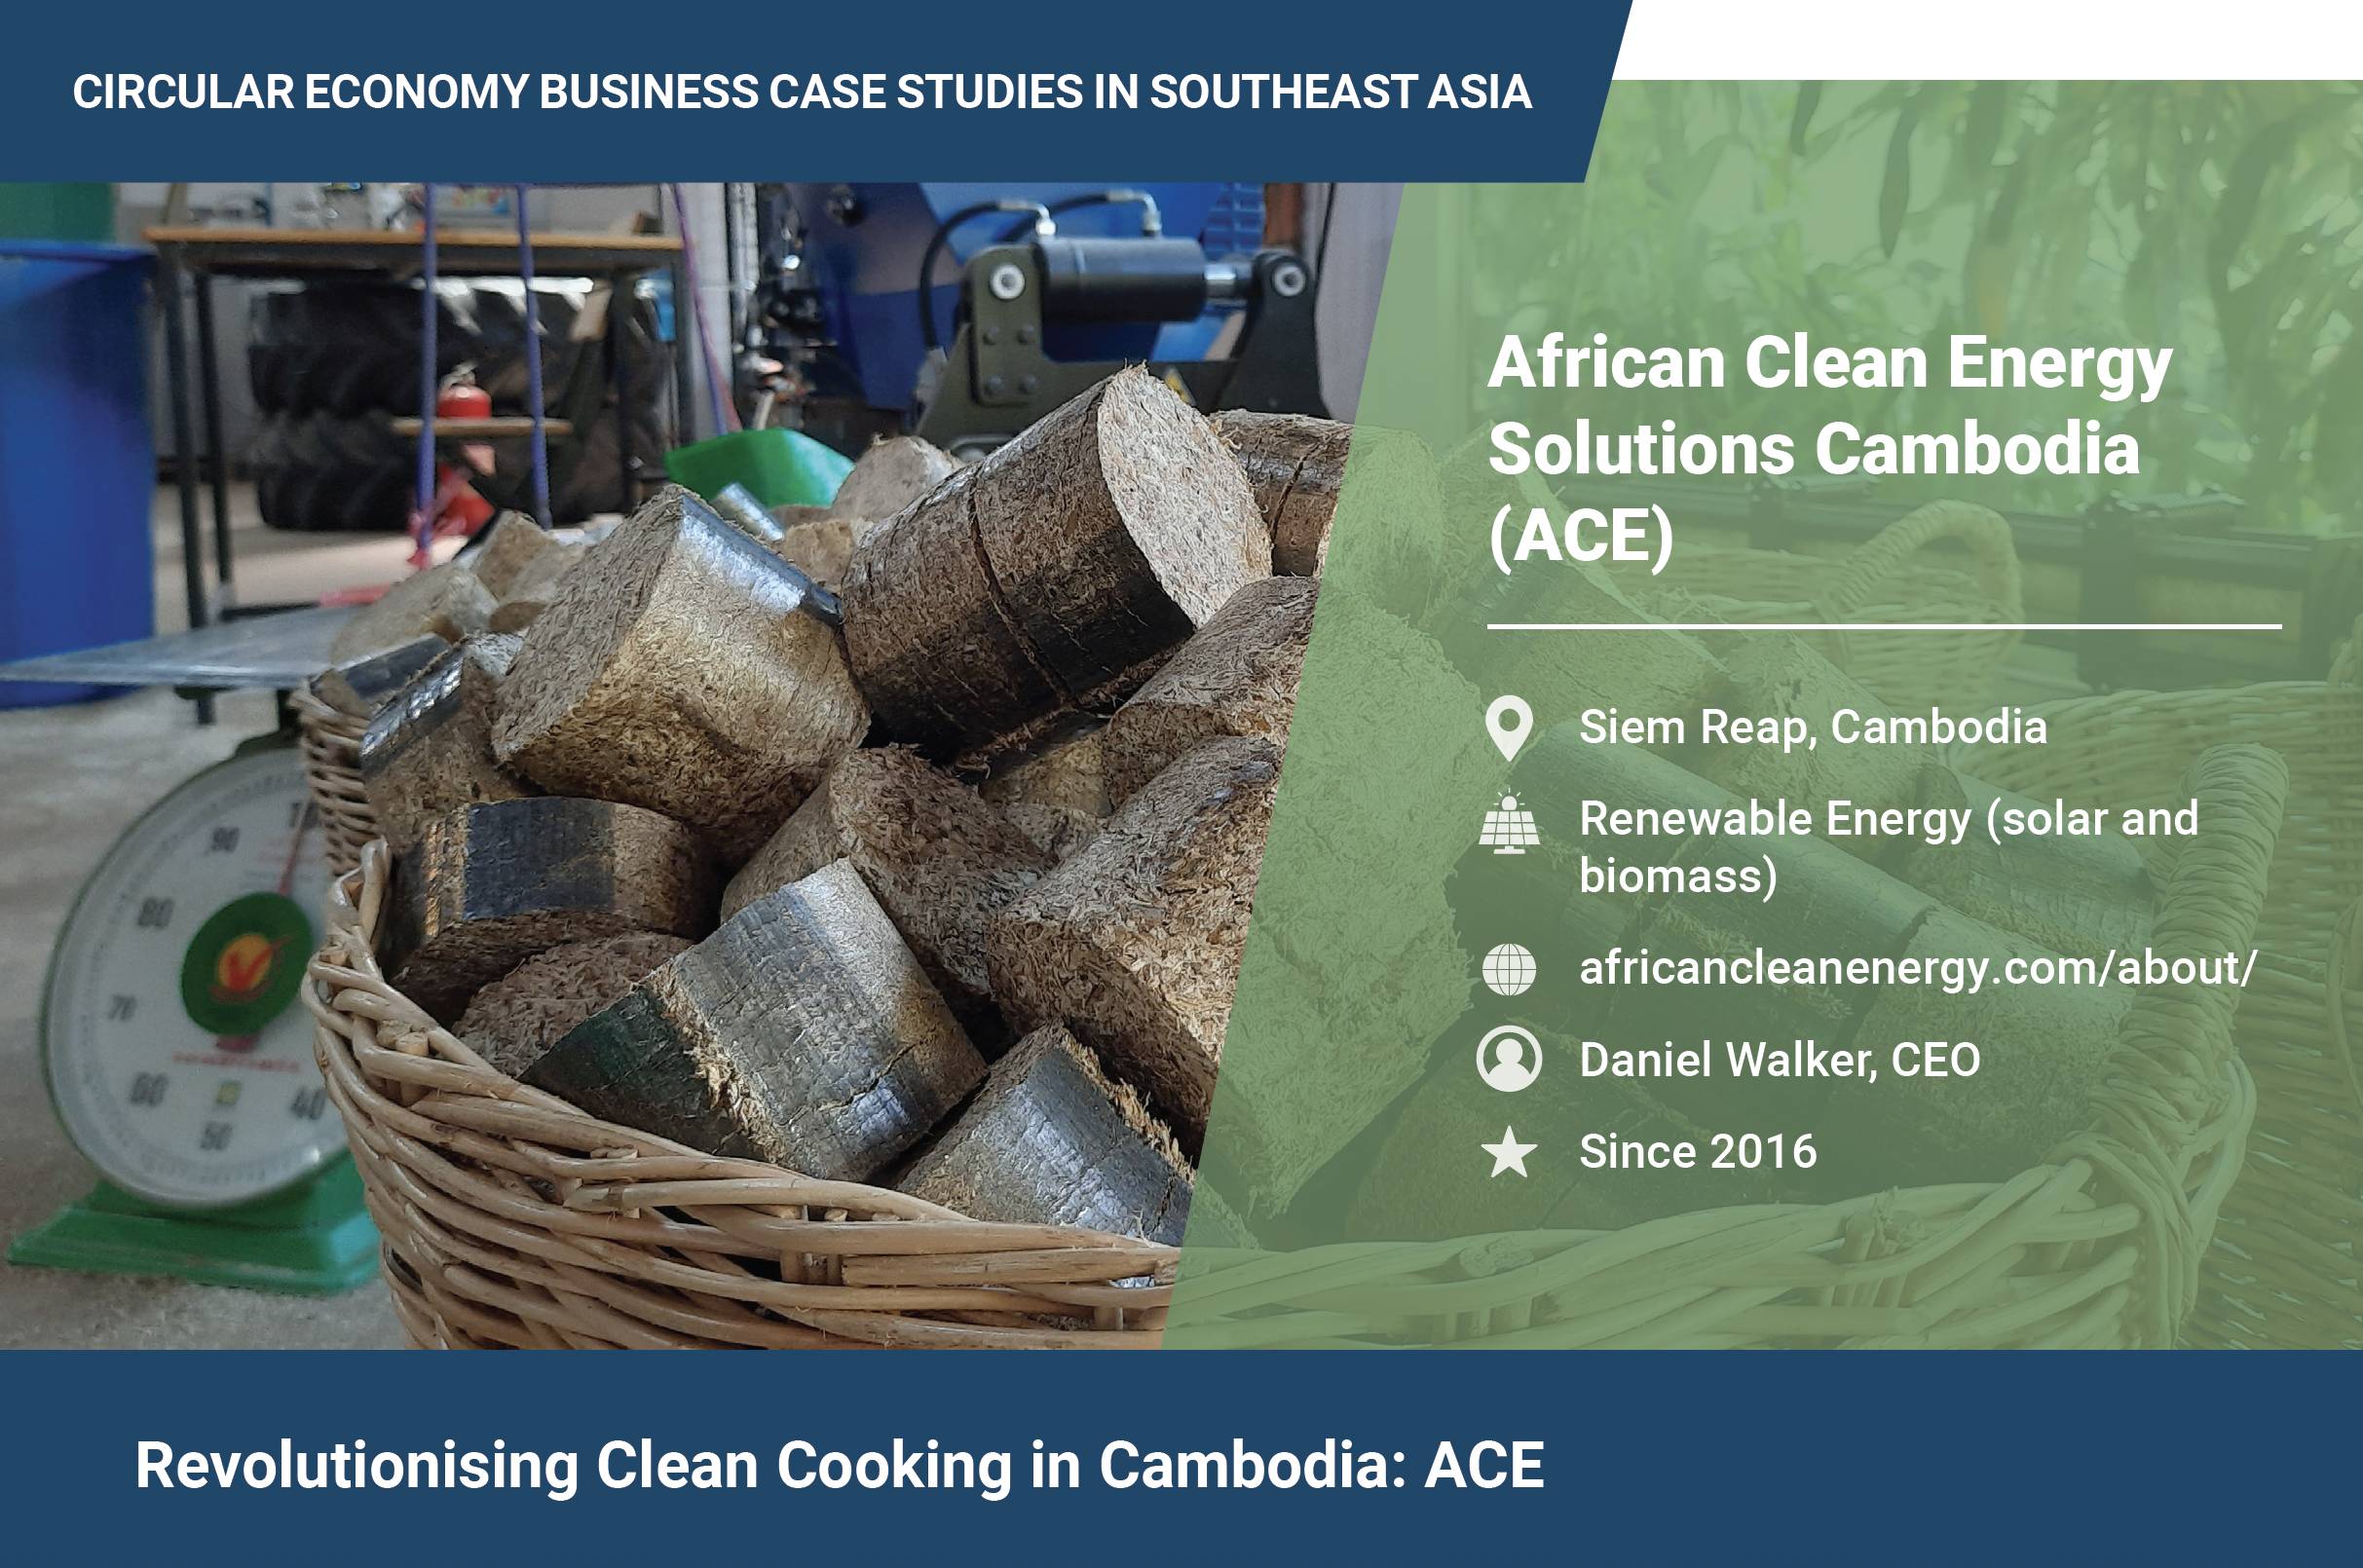 African Clean Energy Solutions in Cambodia